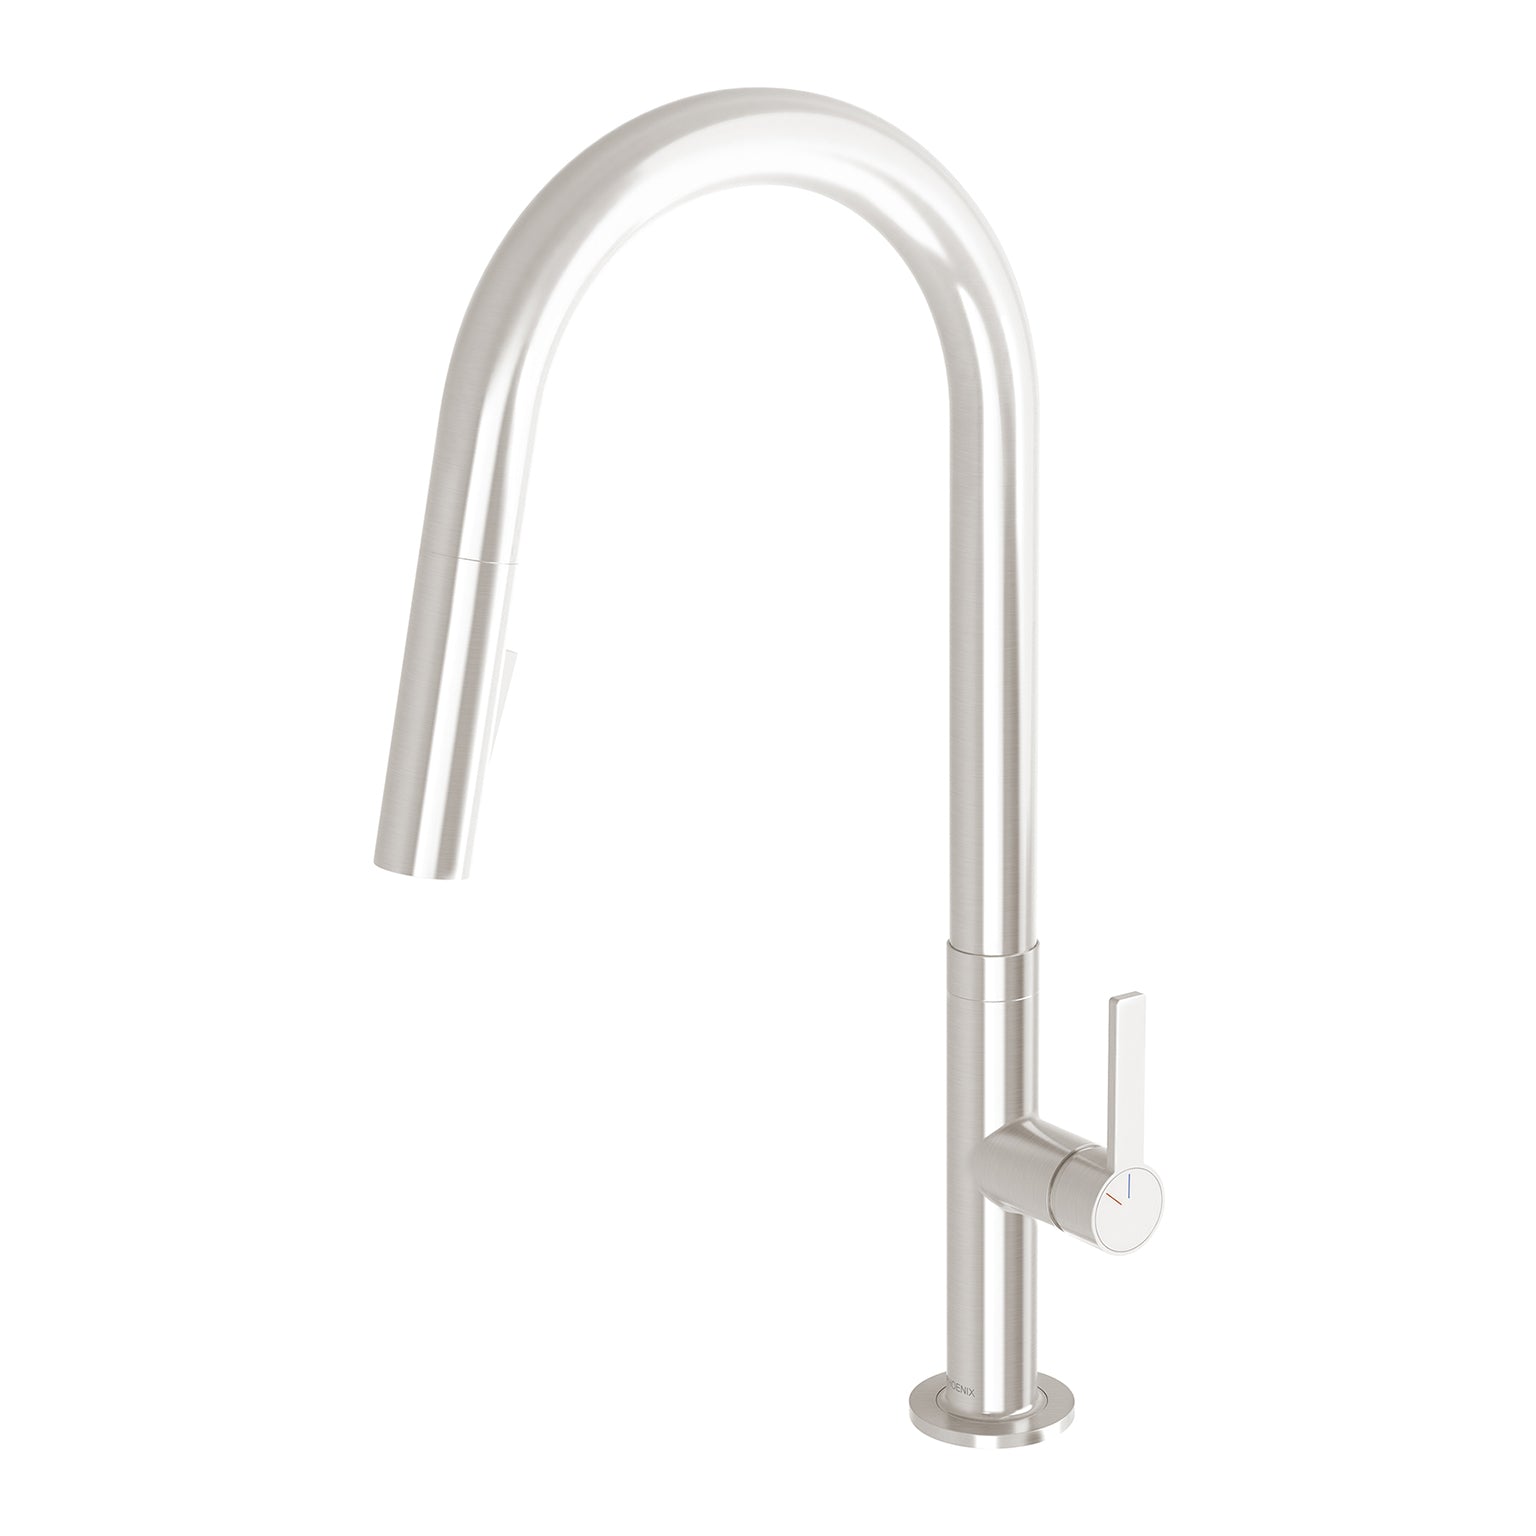 PHOENIX LEXI MKII PULL OUT SINK MIXER BRUSHED NICKEL